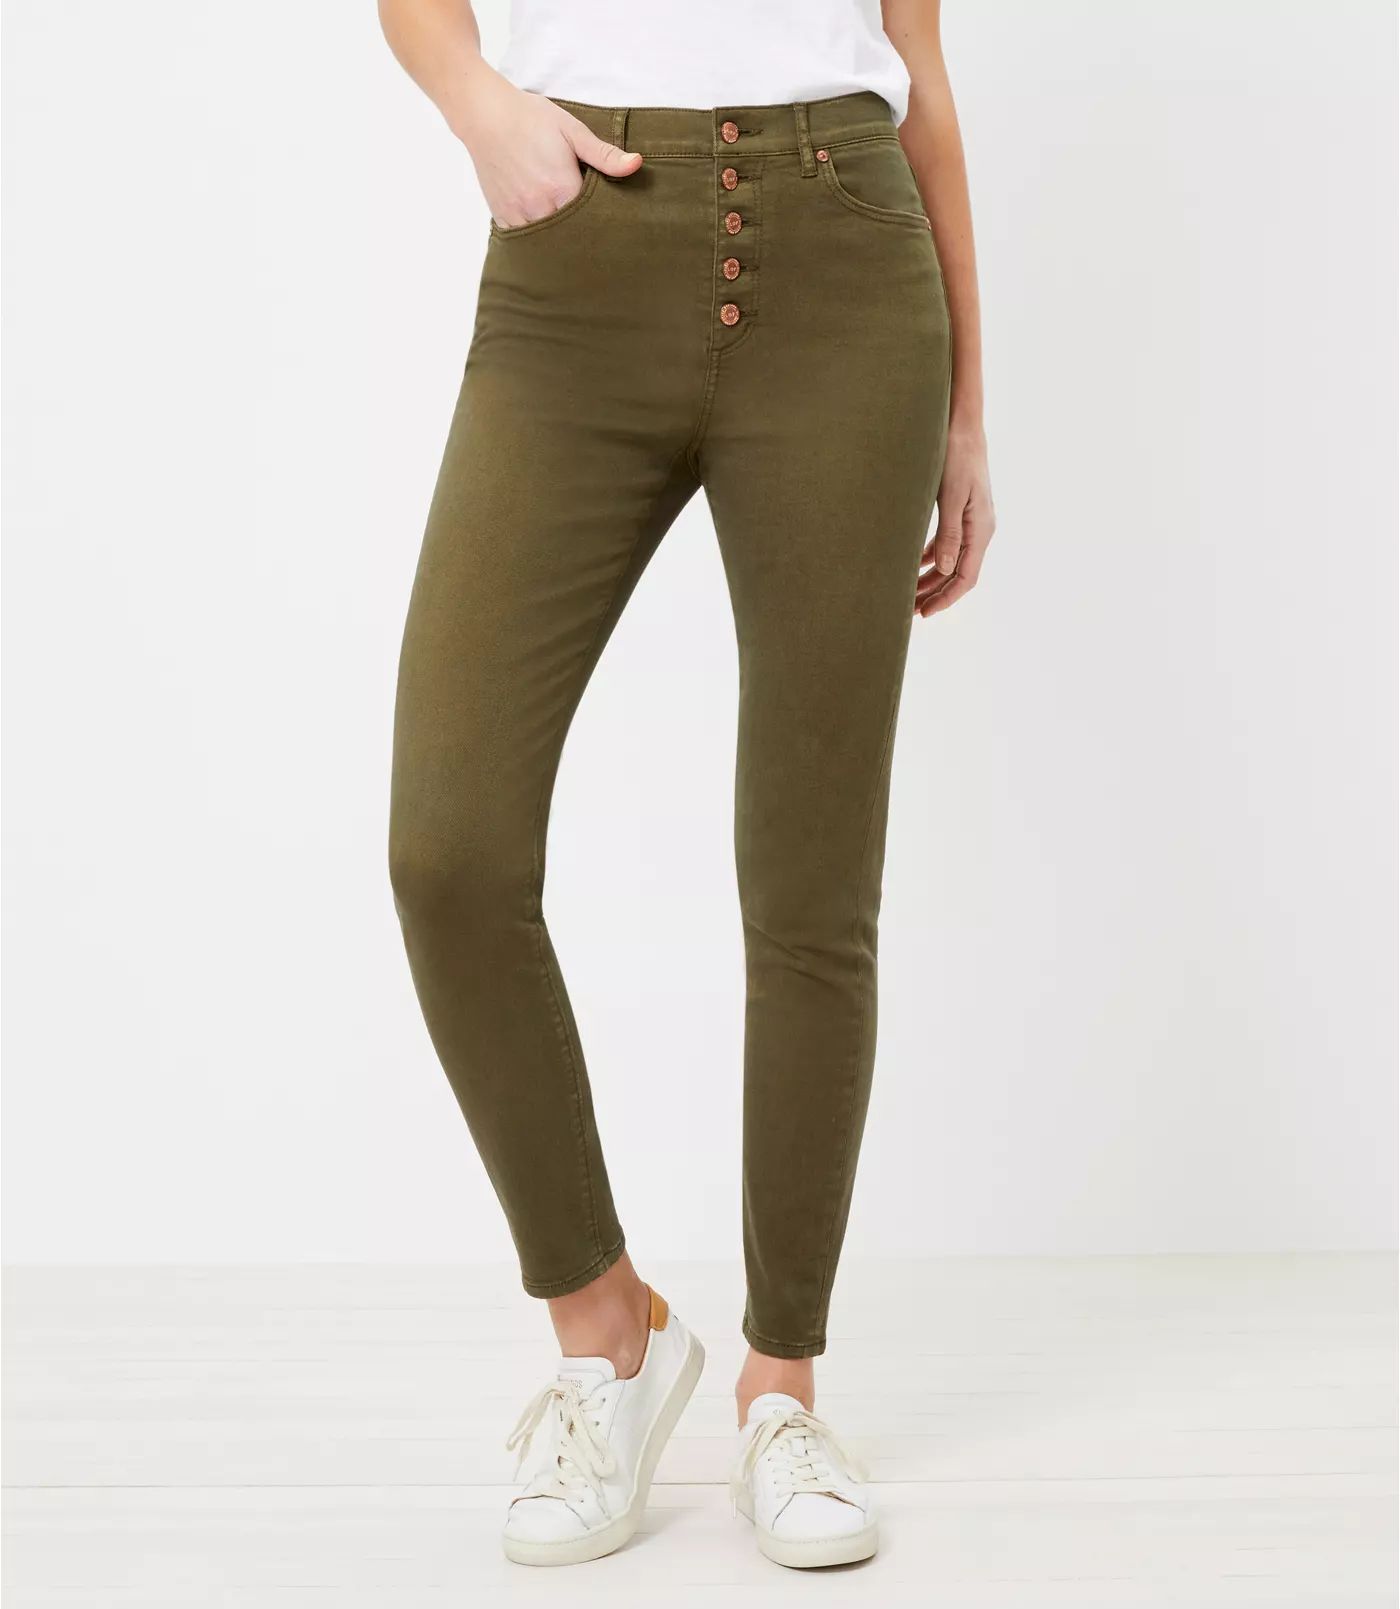 Petite High Rise Button Front Skinny Jeans in Vintage Olive | LOFT